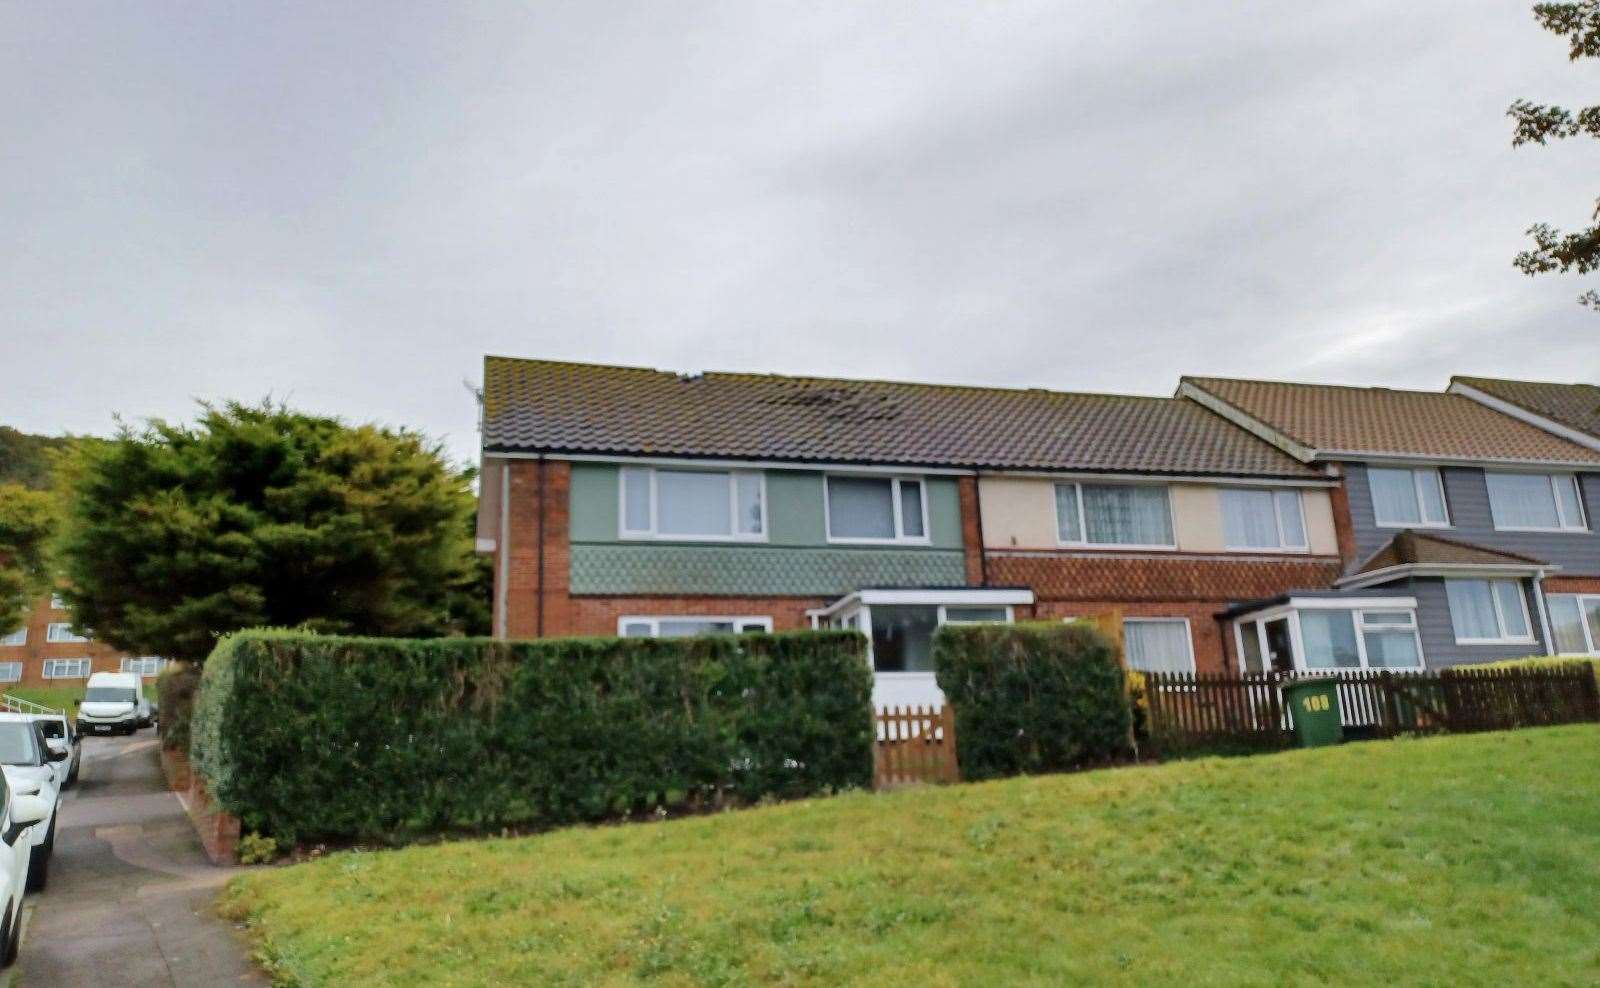 A lightning bolt has punched a hole in the roof of a house in Folkestone